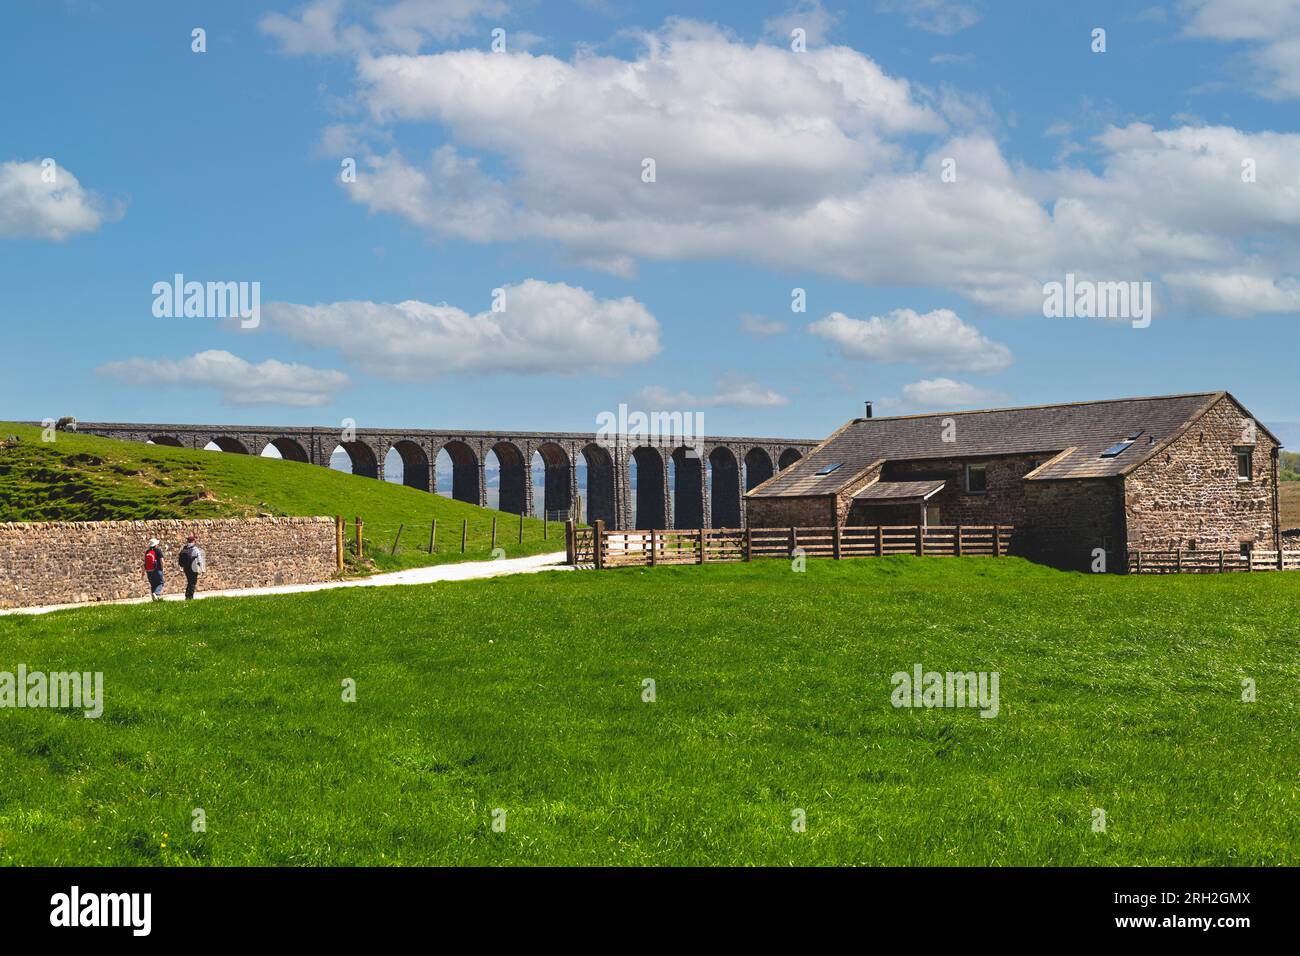 Ribblehead Viaduct in the North Yorkshire Dales. Two hackers walking near traditional stone farm buildings. Stock Photo